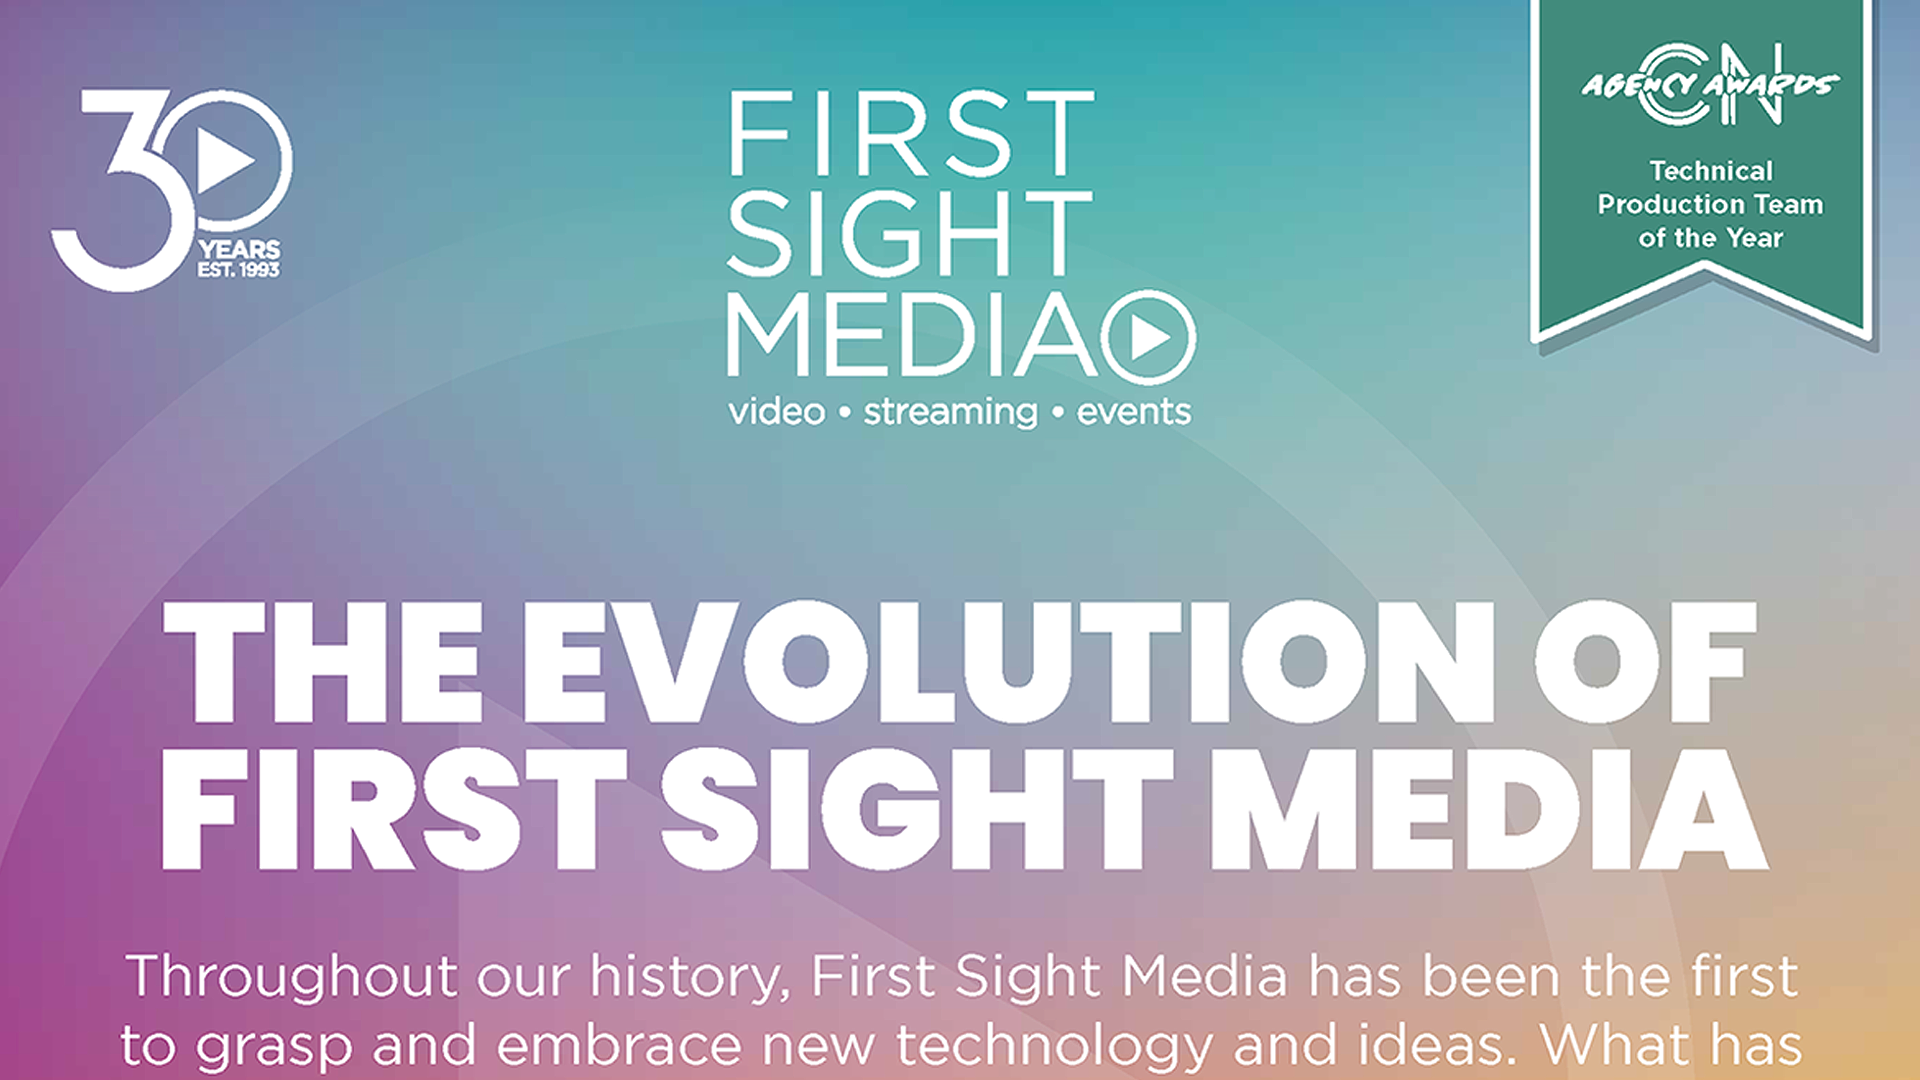 30 YEARS OF FIRST SIGHT MEDIA: THE EVOLUTION